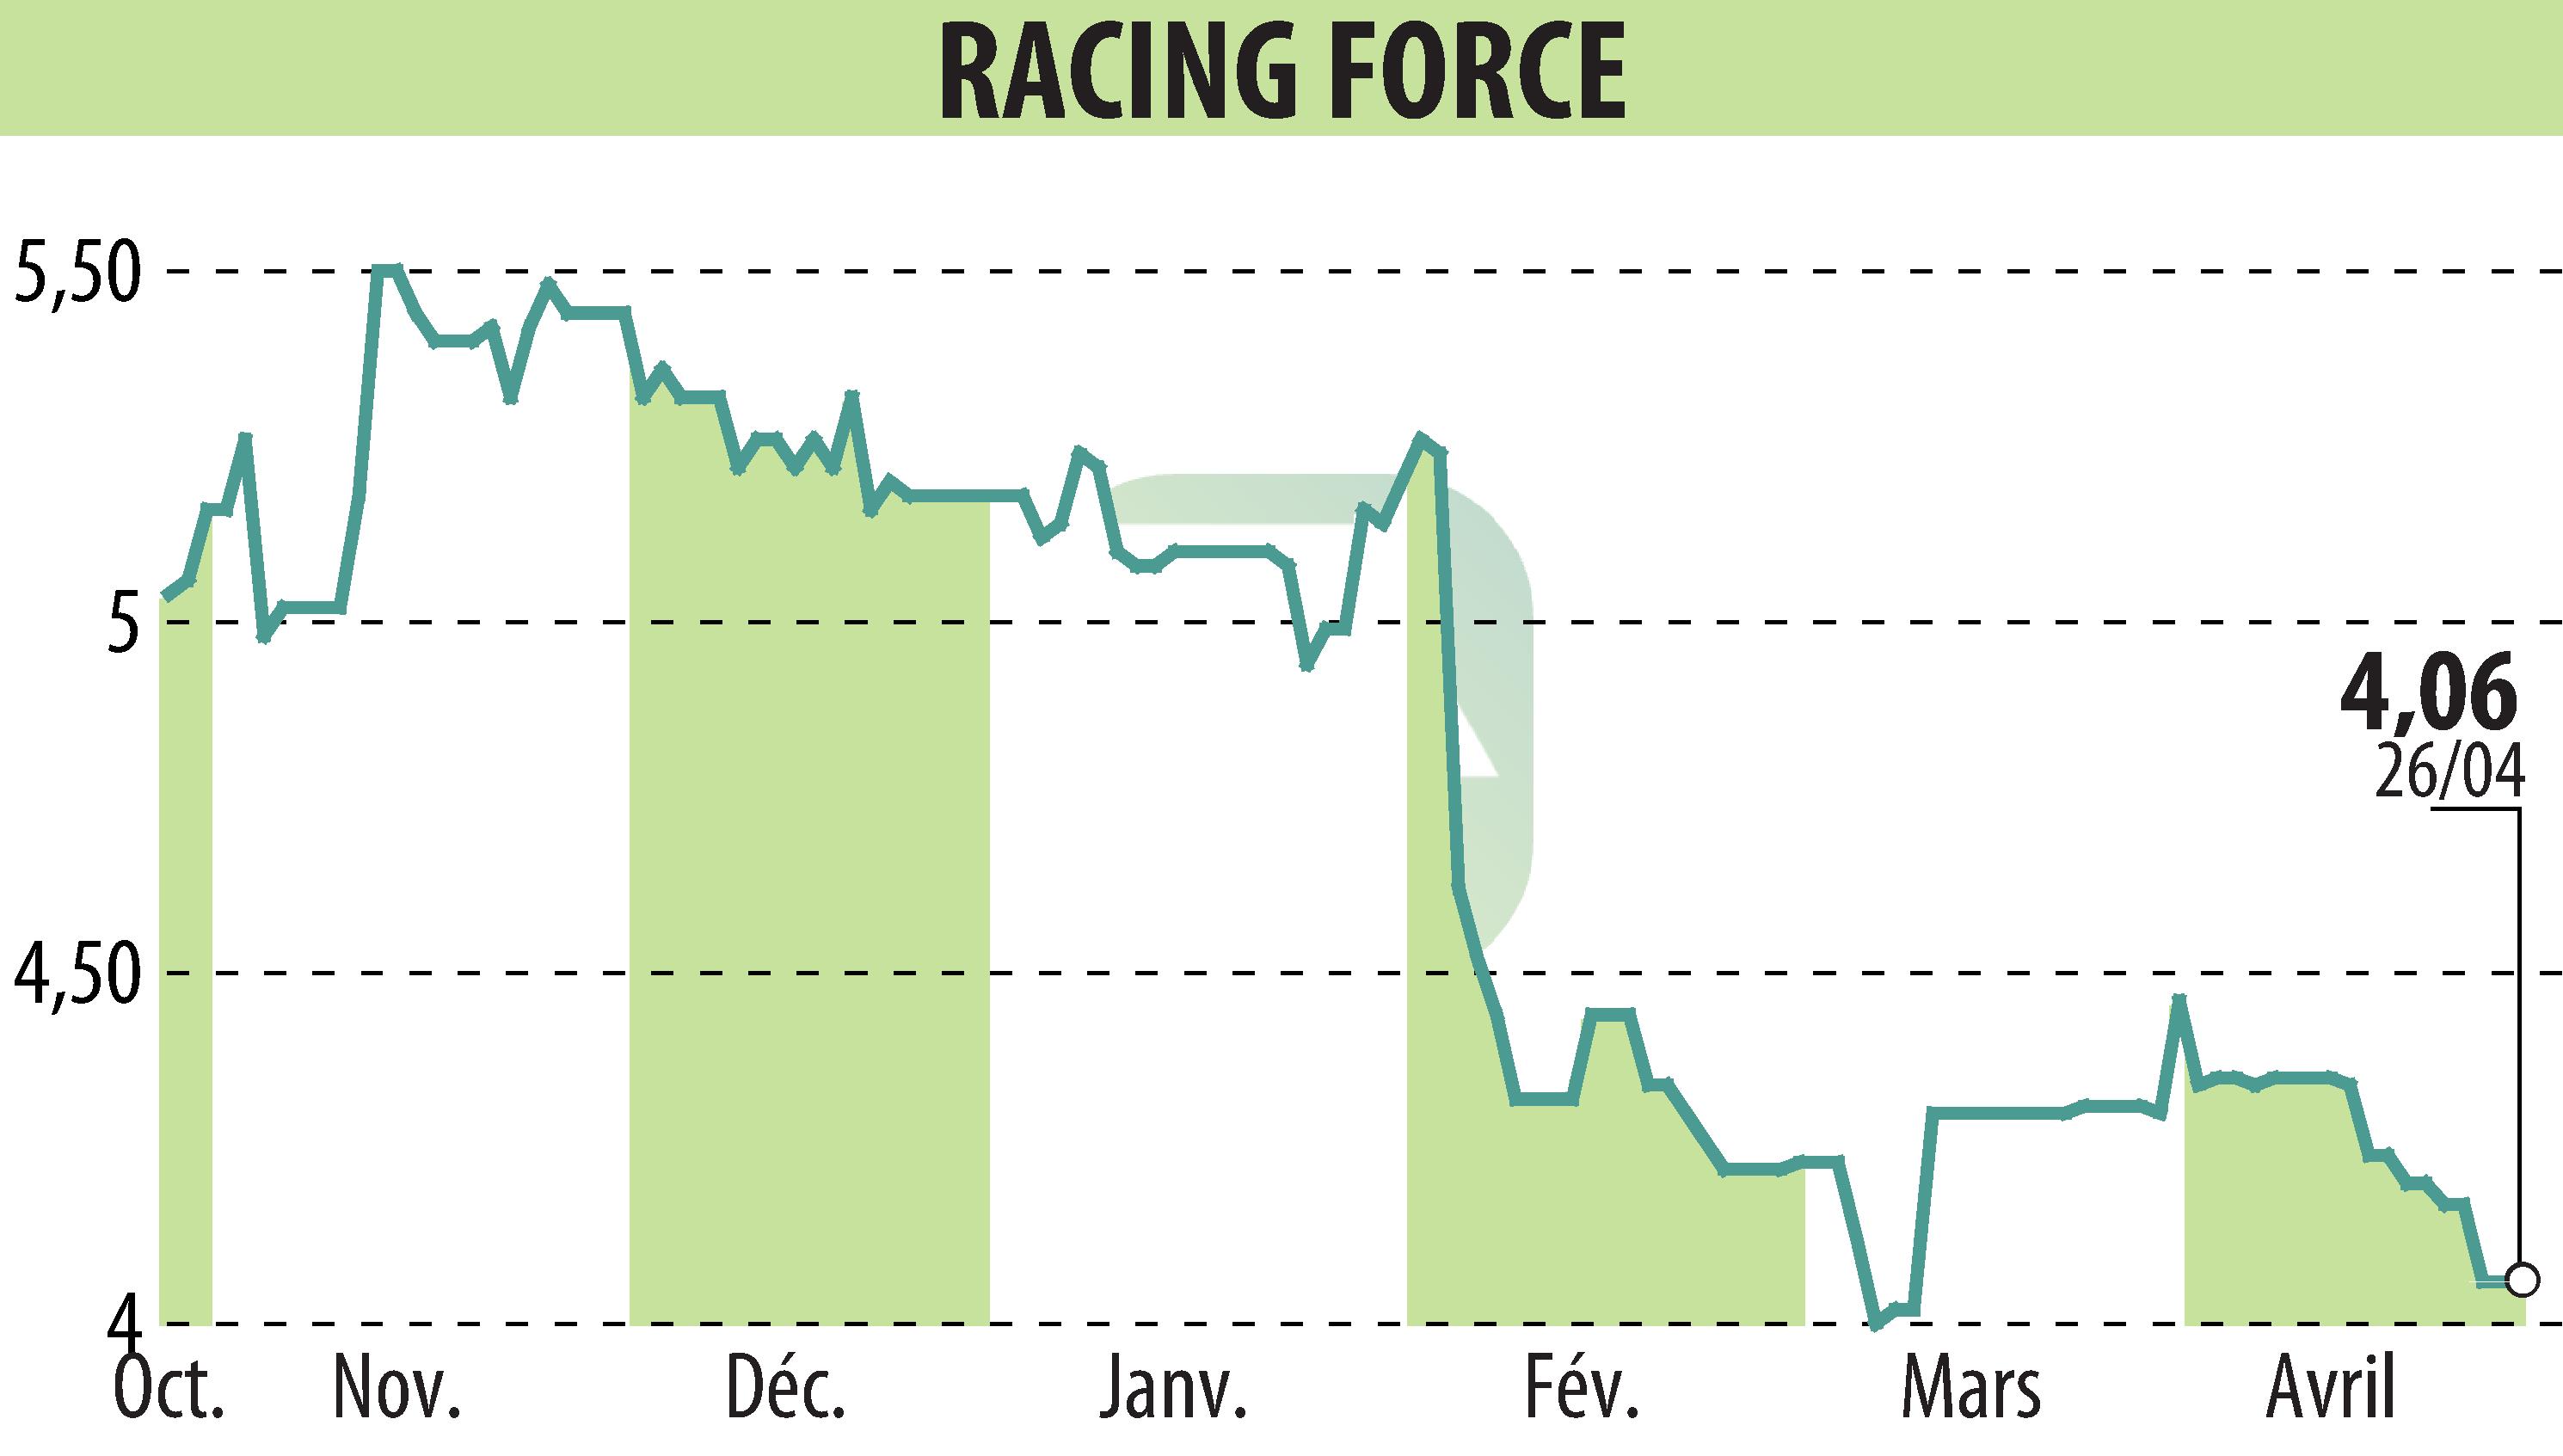 Stock price chart of RACING FORCE (EPA:ALRFG) showing fluctuations.